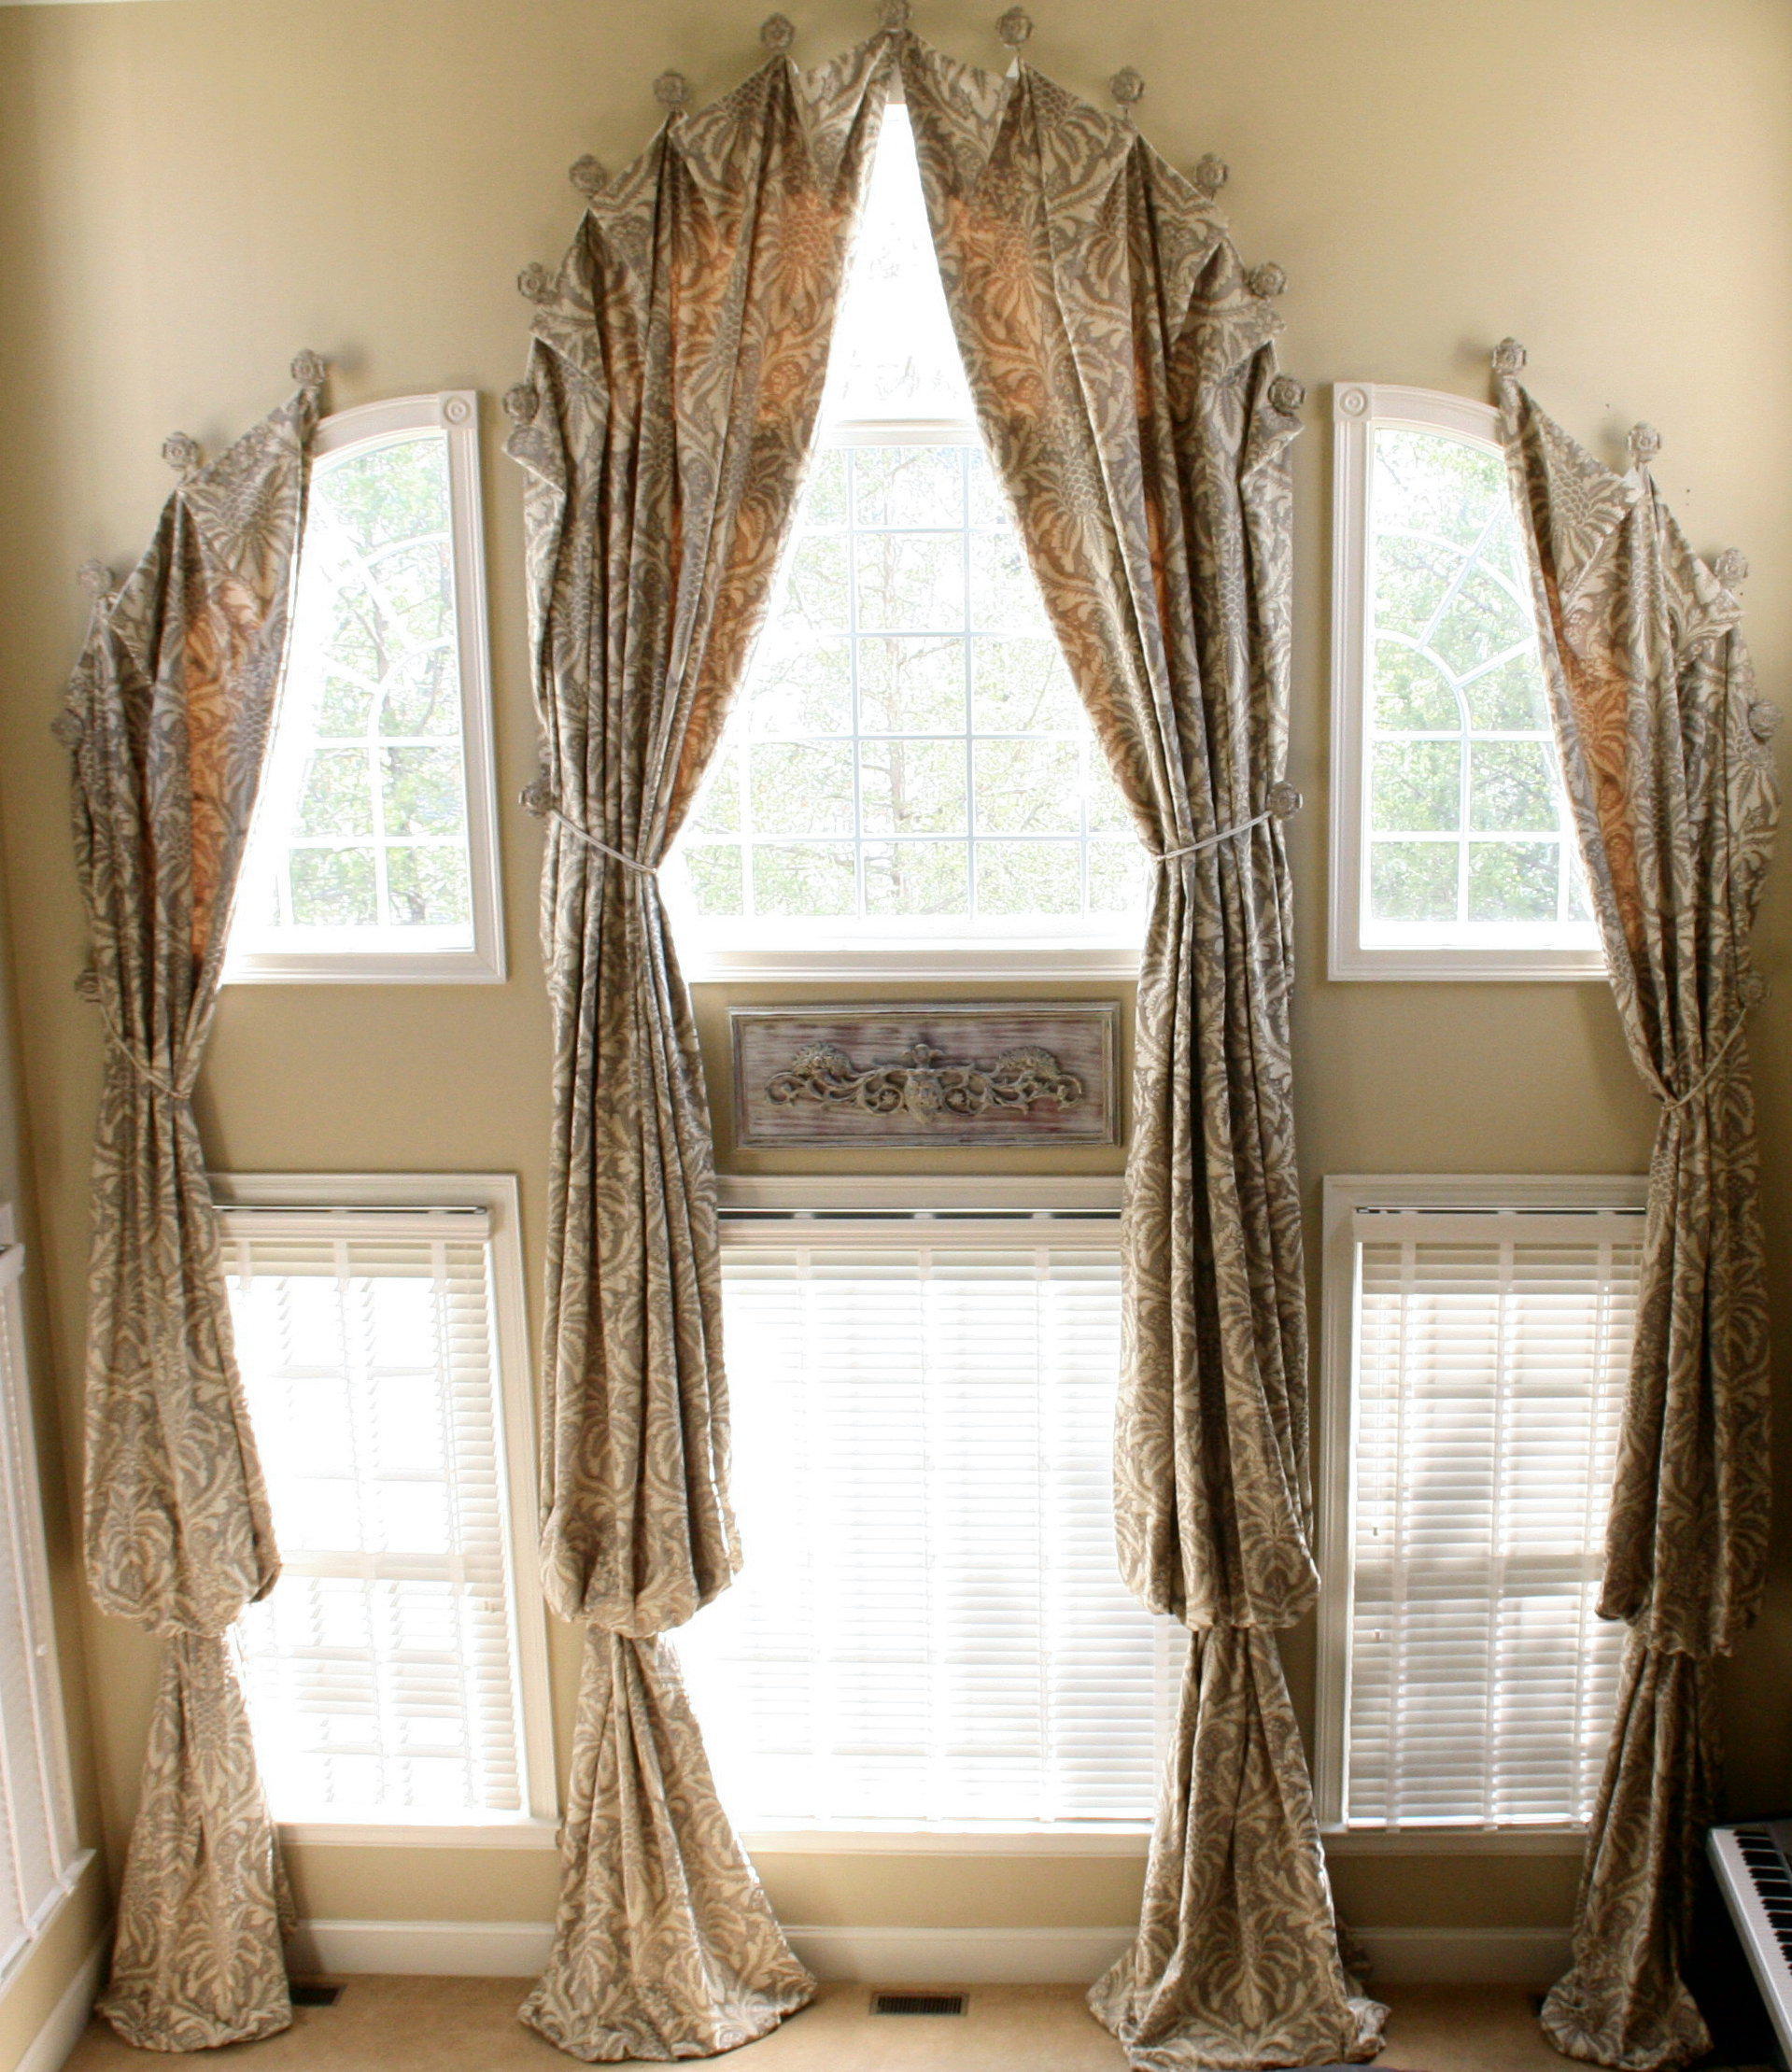 ARCH WINDOW SHADES - COMPARE PRICES, REVIEWS AND BUY AT NEXTAG